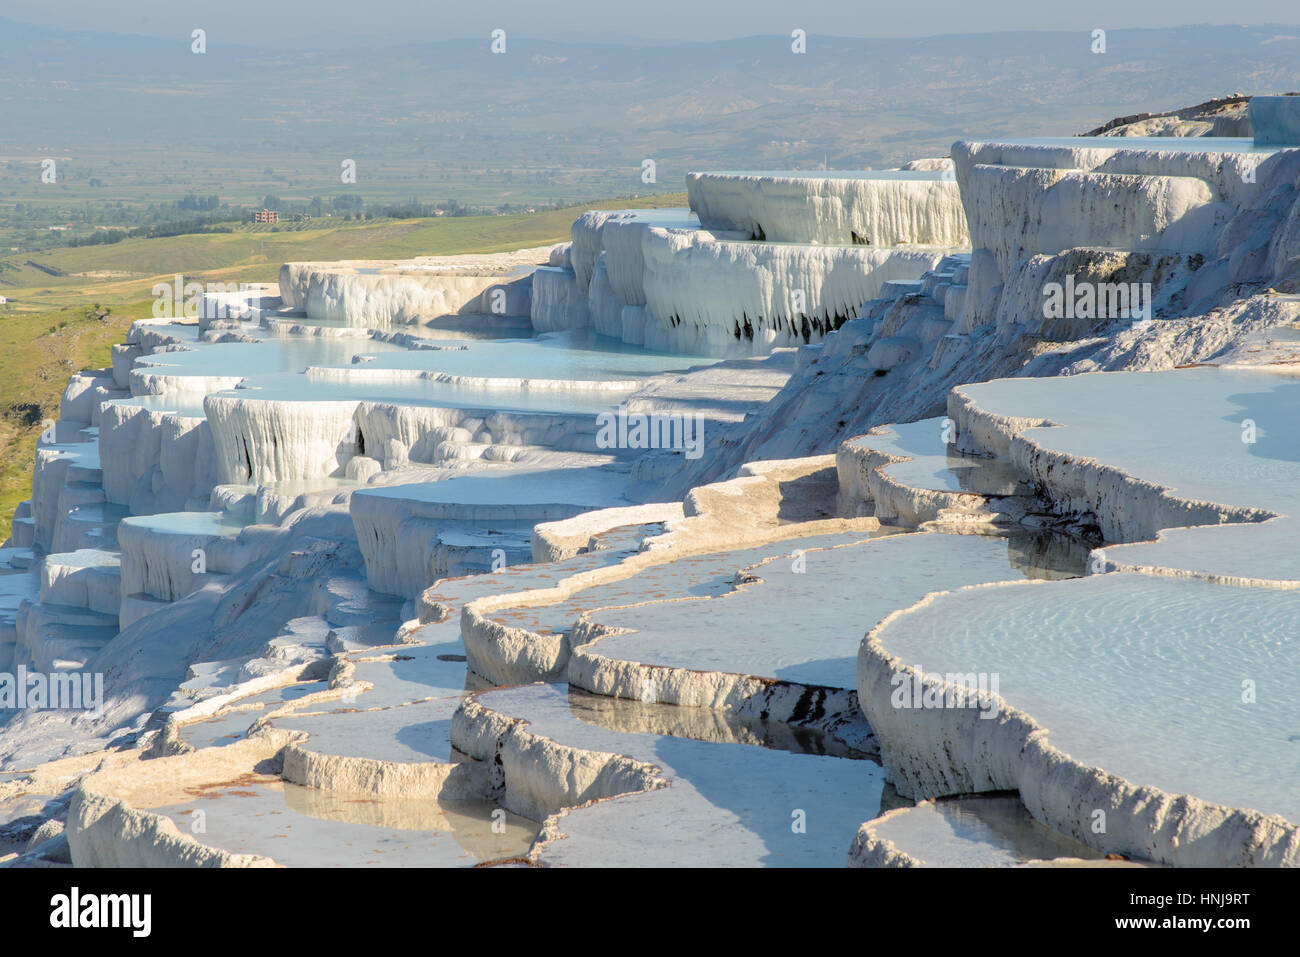 The enchanting pools of Pamukkale in Turkey. Pamukkale contains hot springs and travertines, terraces of carbonate minerals left by the flowing water. Stock Photo